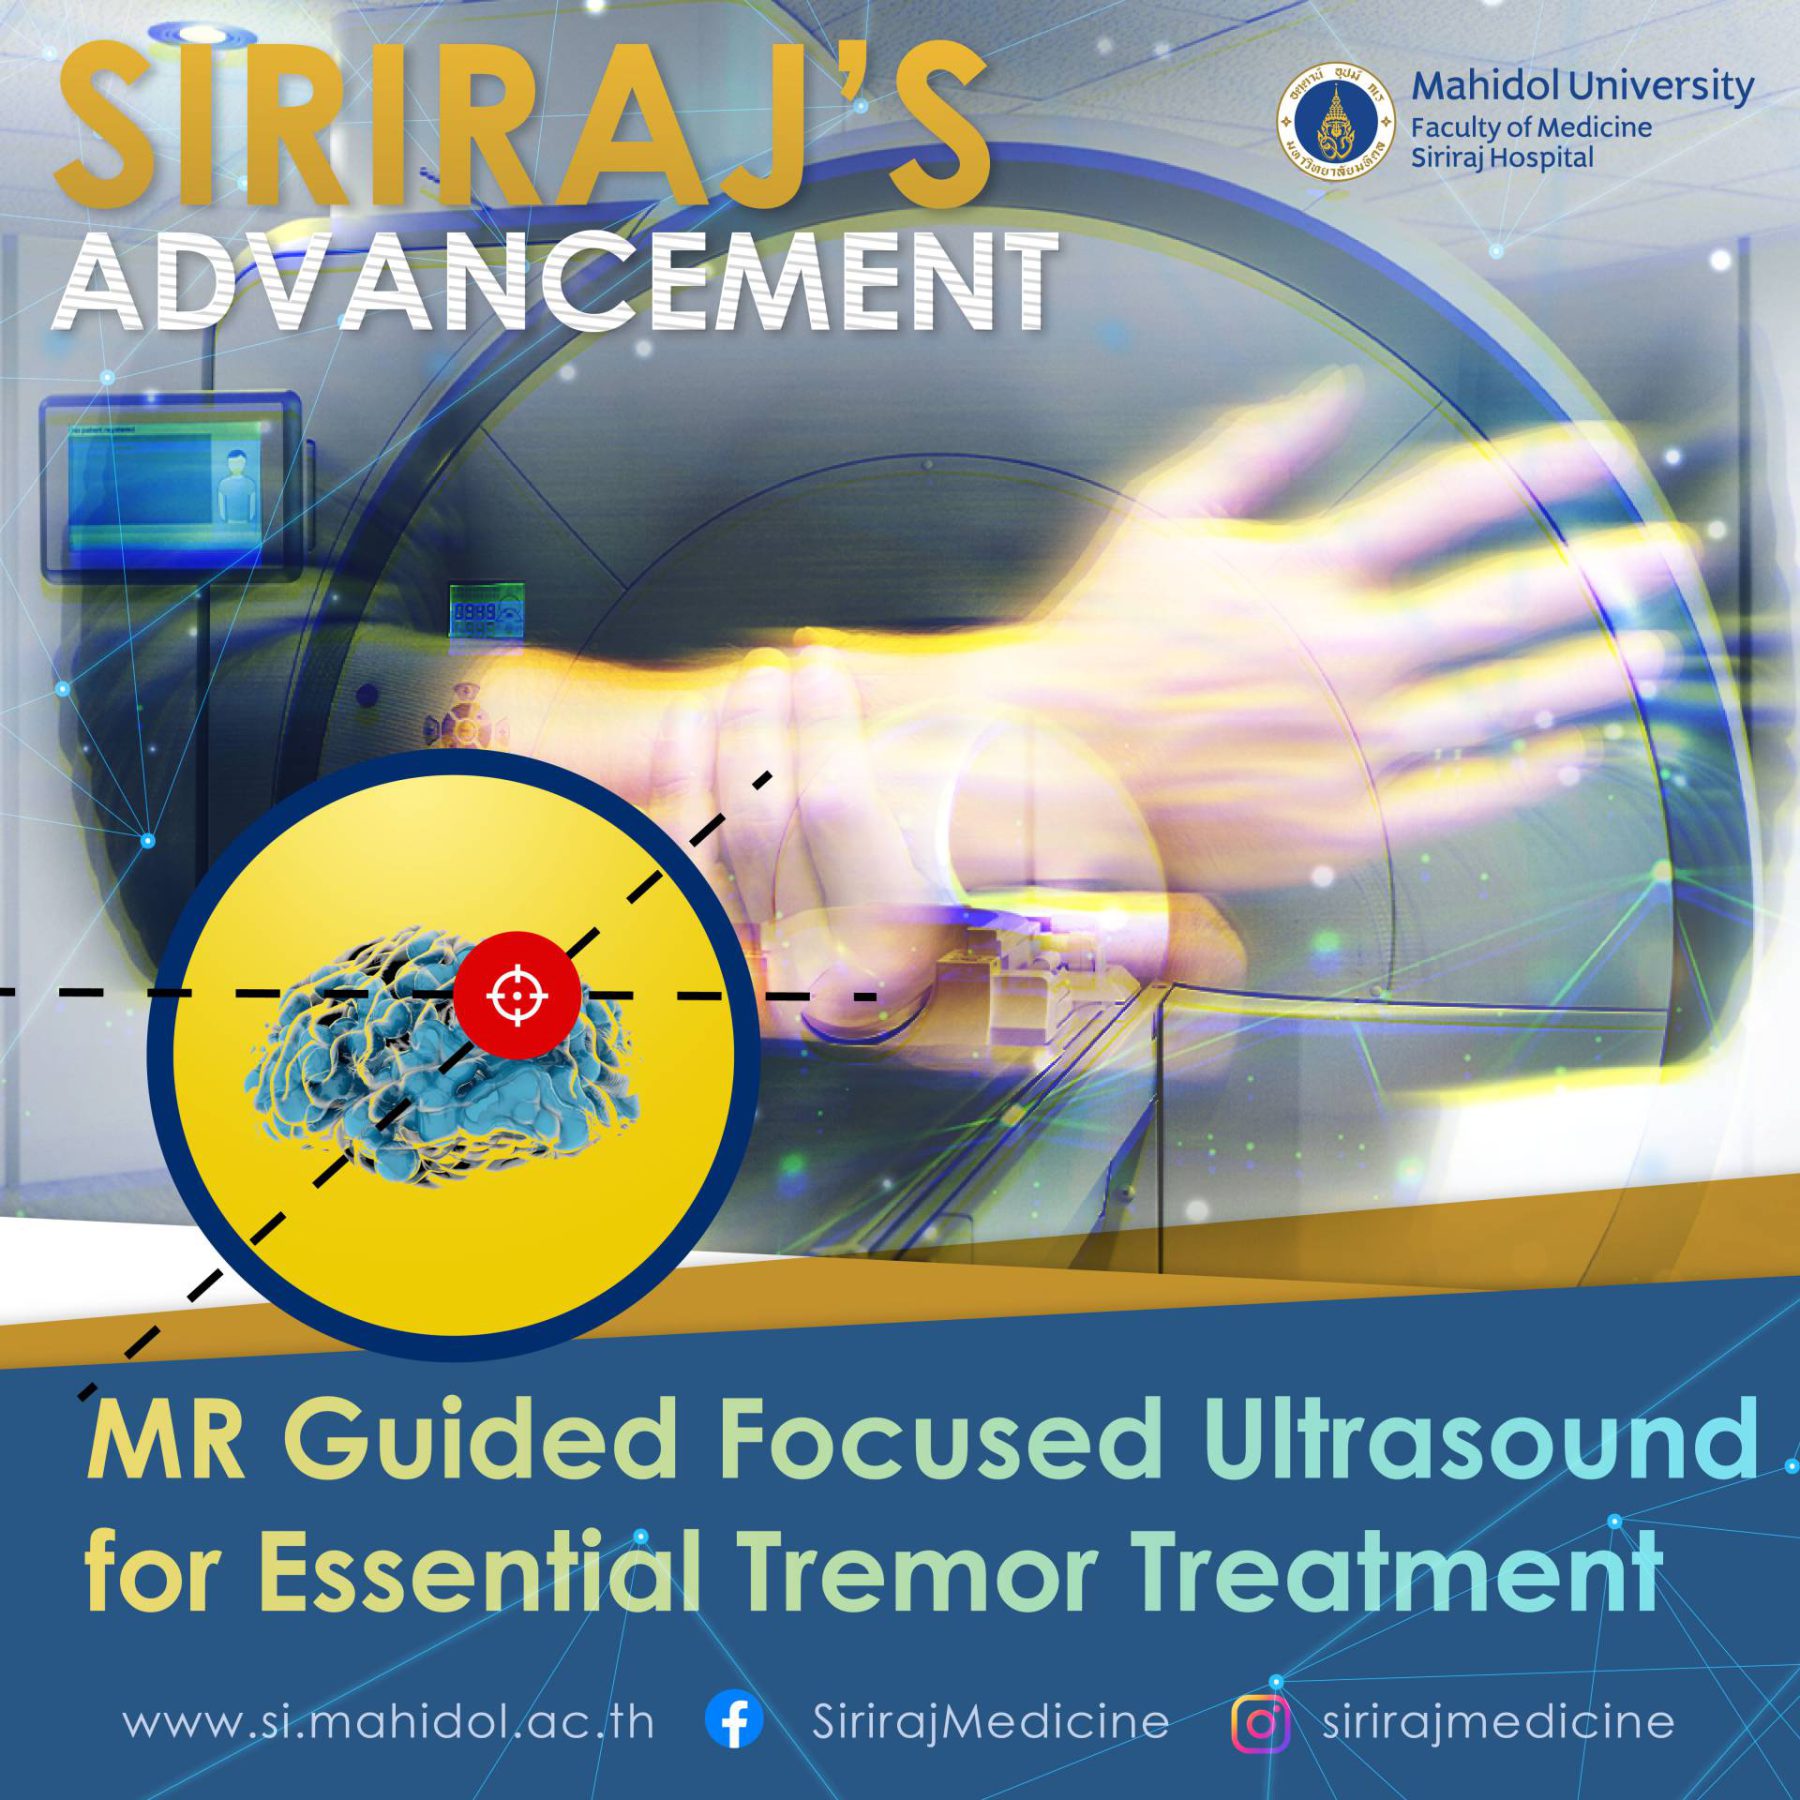 MRI-guided Focused Ultrasound (MRgFUS) The advancement in radiology that faculty of medicine Siriraj hospital